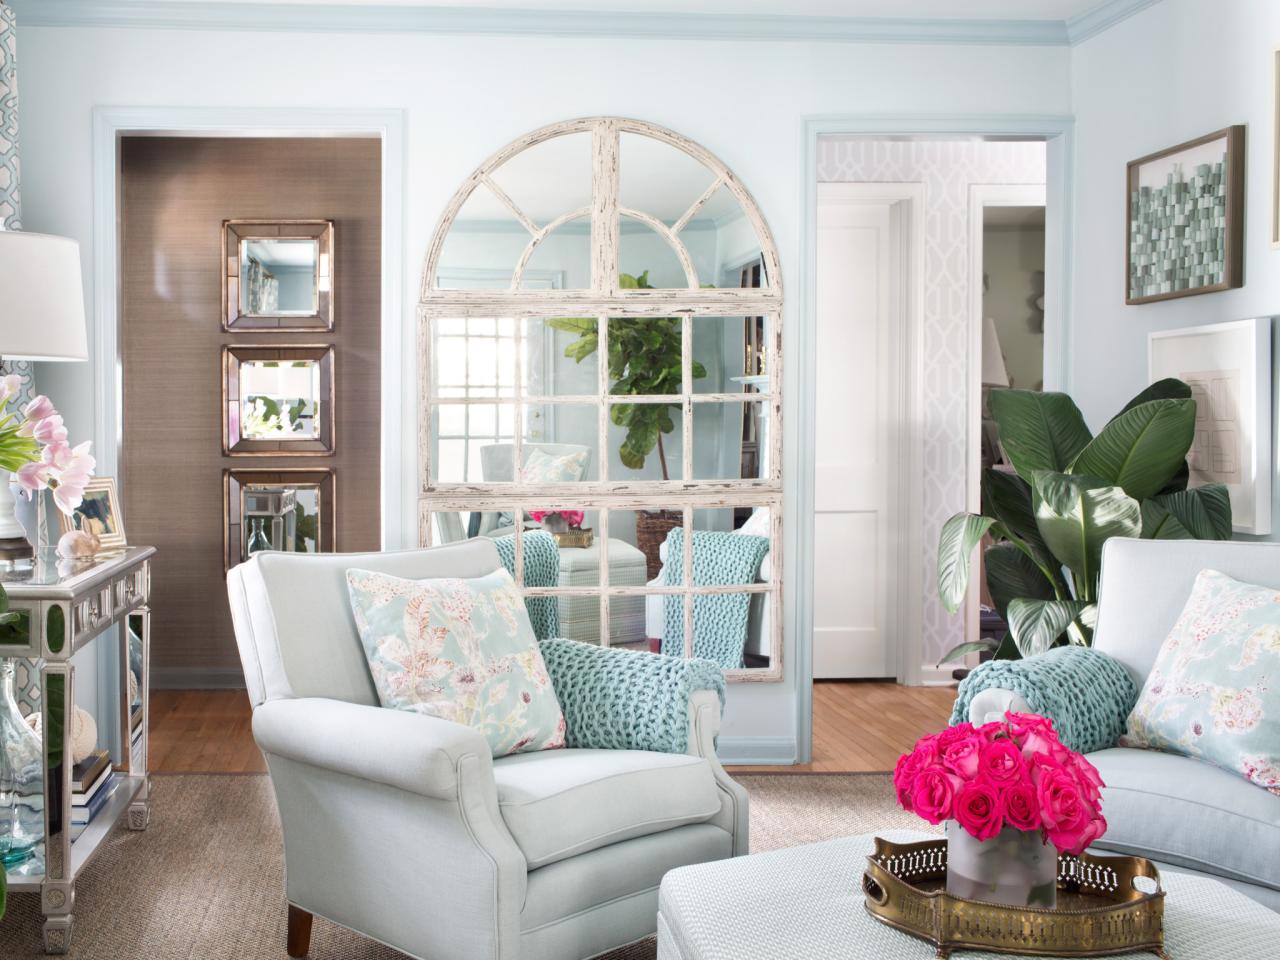 Decorate-with-Mirrors 8 Simple Tips to Choose Best Furniture for Small Spaces